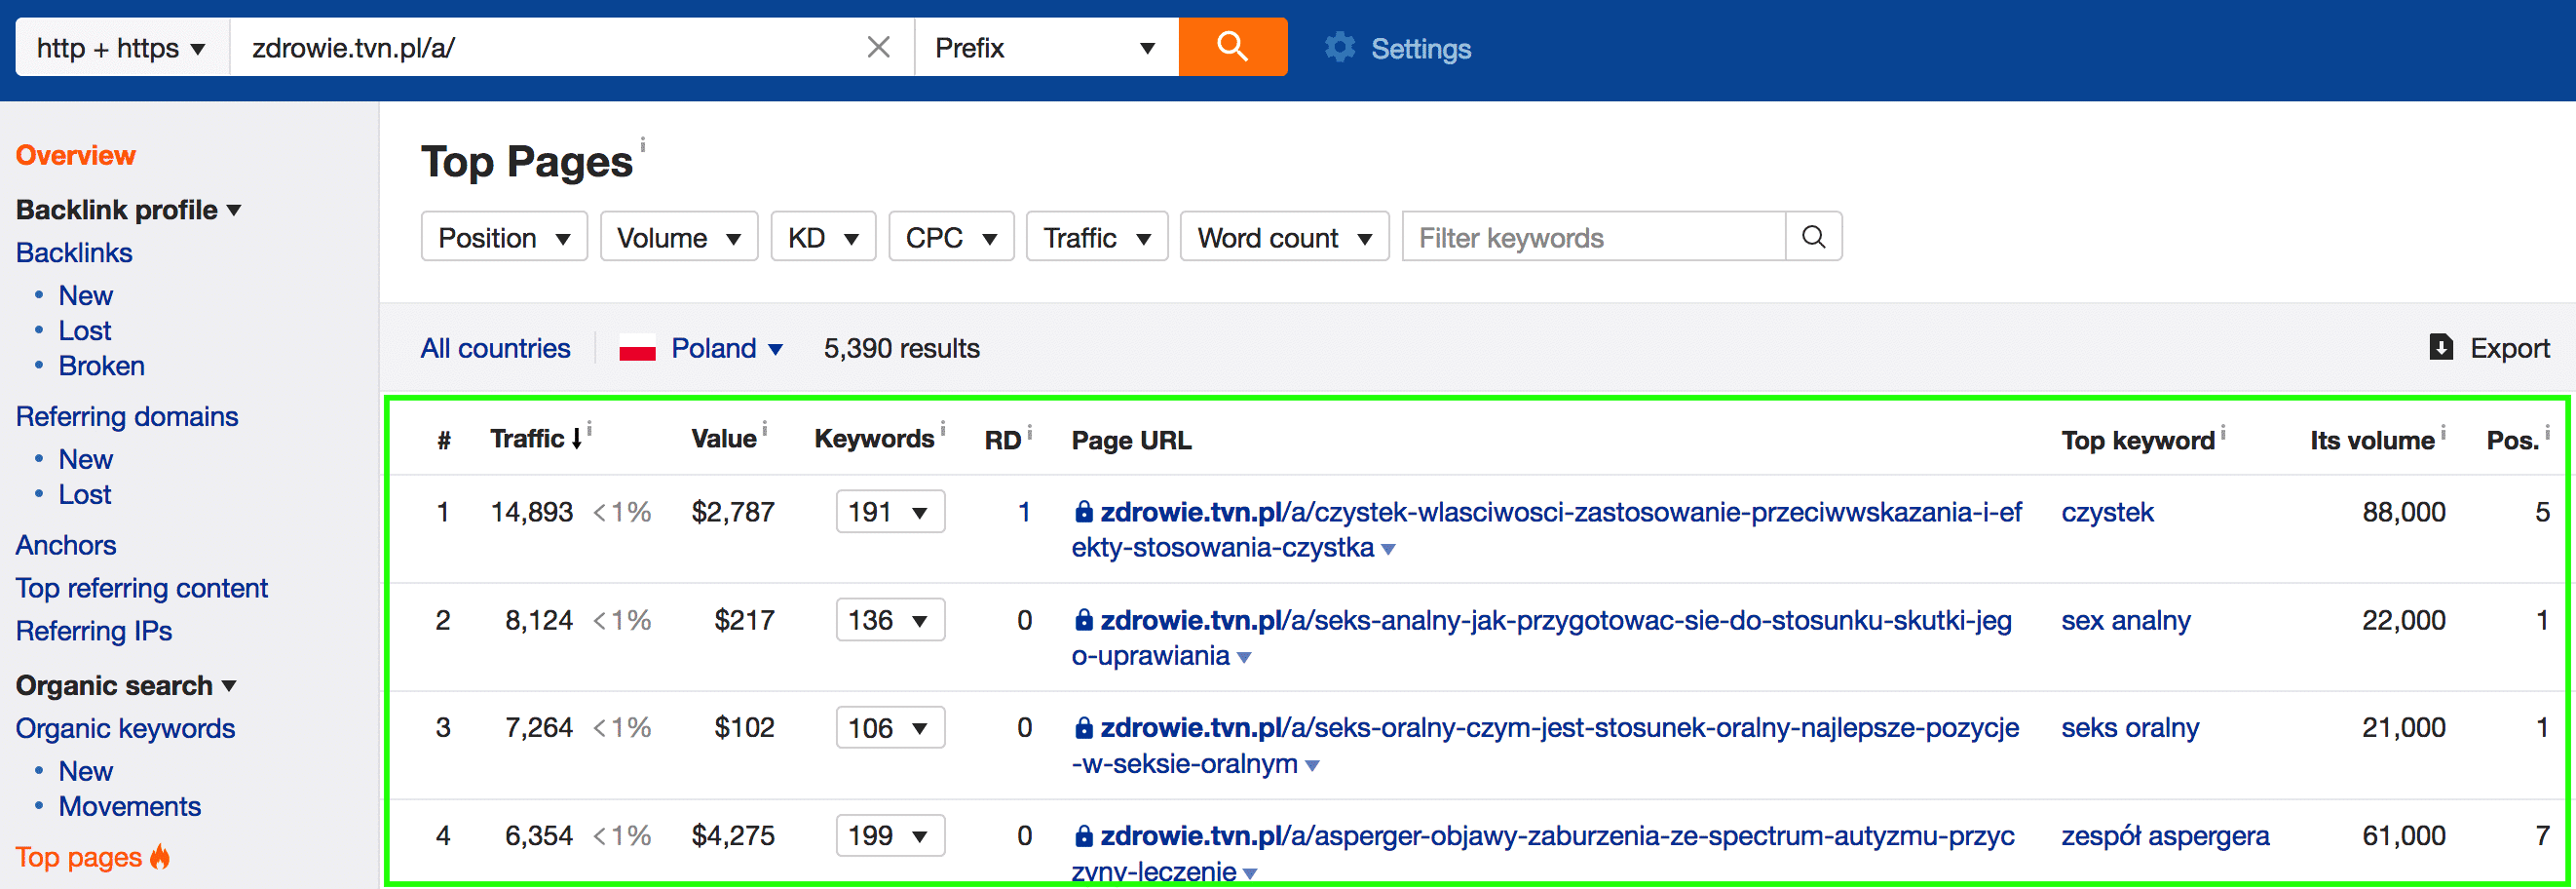 zdrowie tvn pl ahrefs top pages